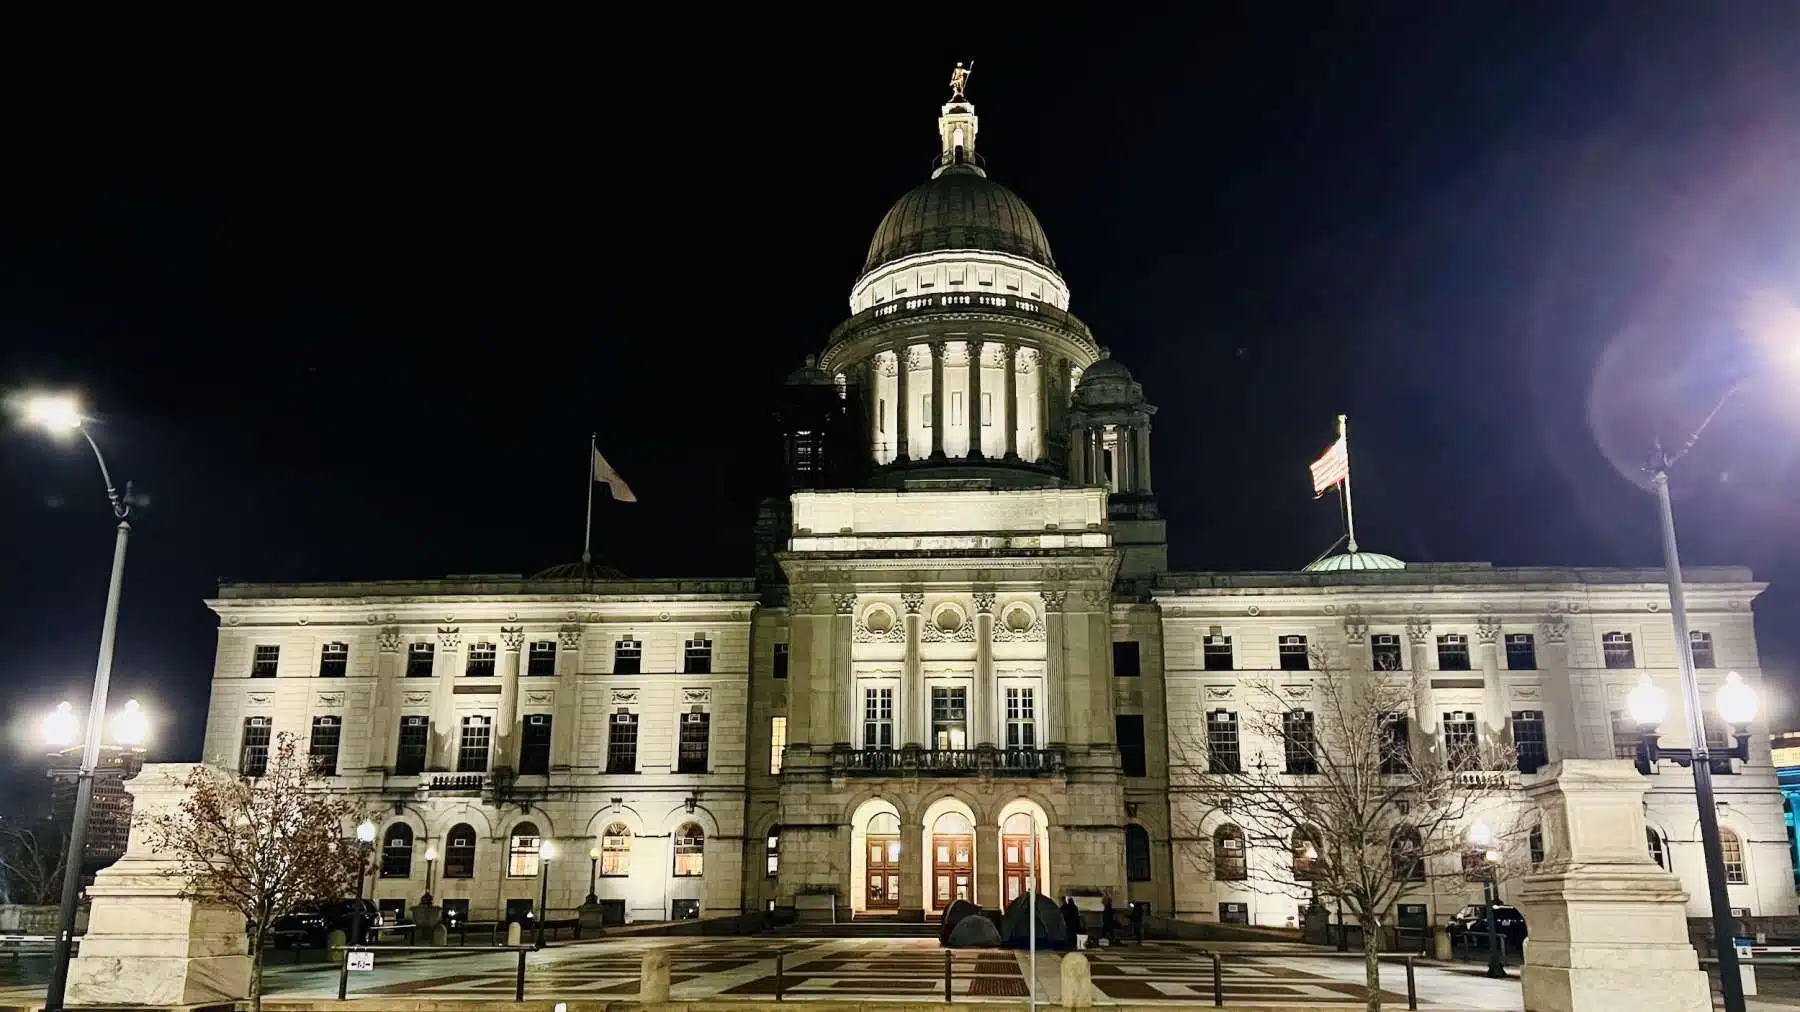 Rhode Island News: RI redistricting bill seeks to favor incumbents, give party leaders more control at voters’ expense